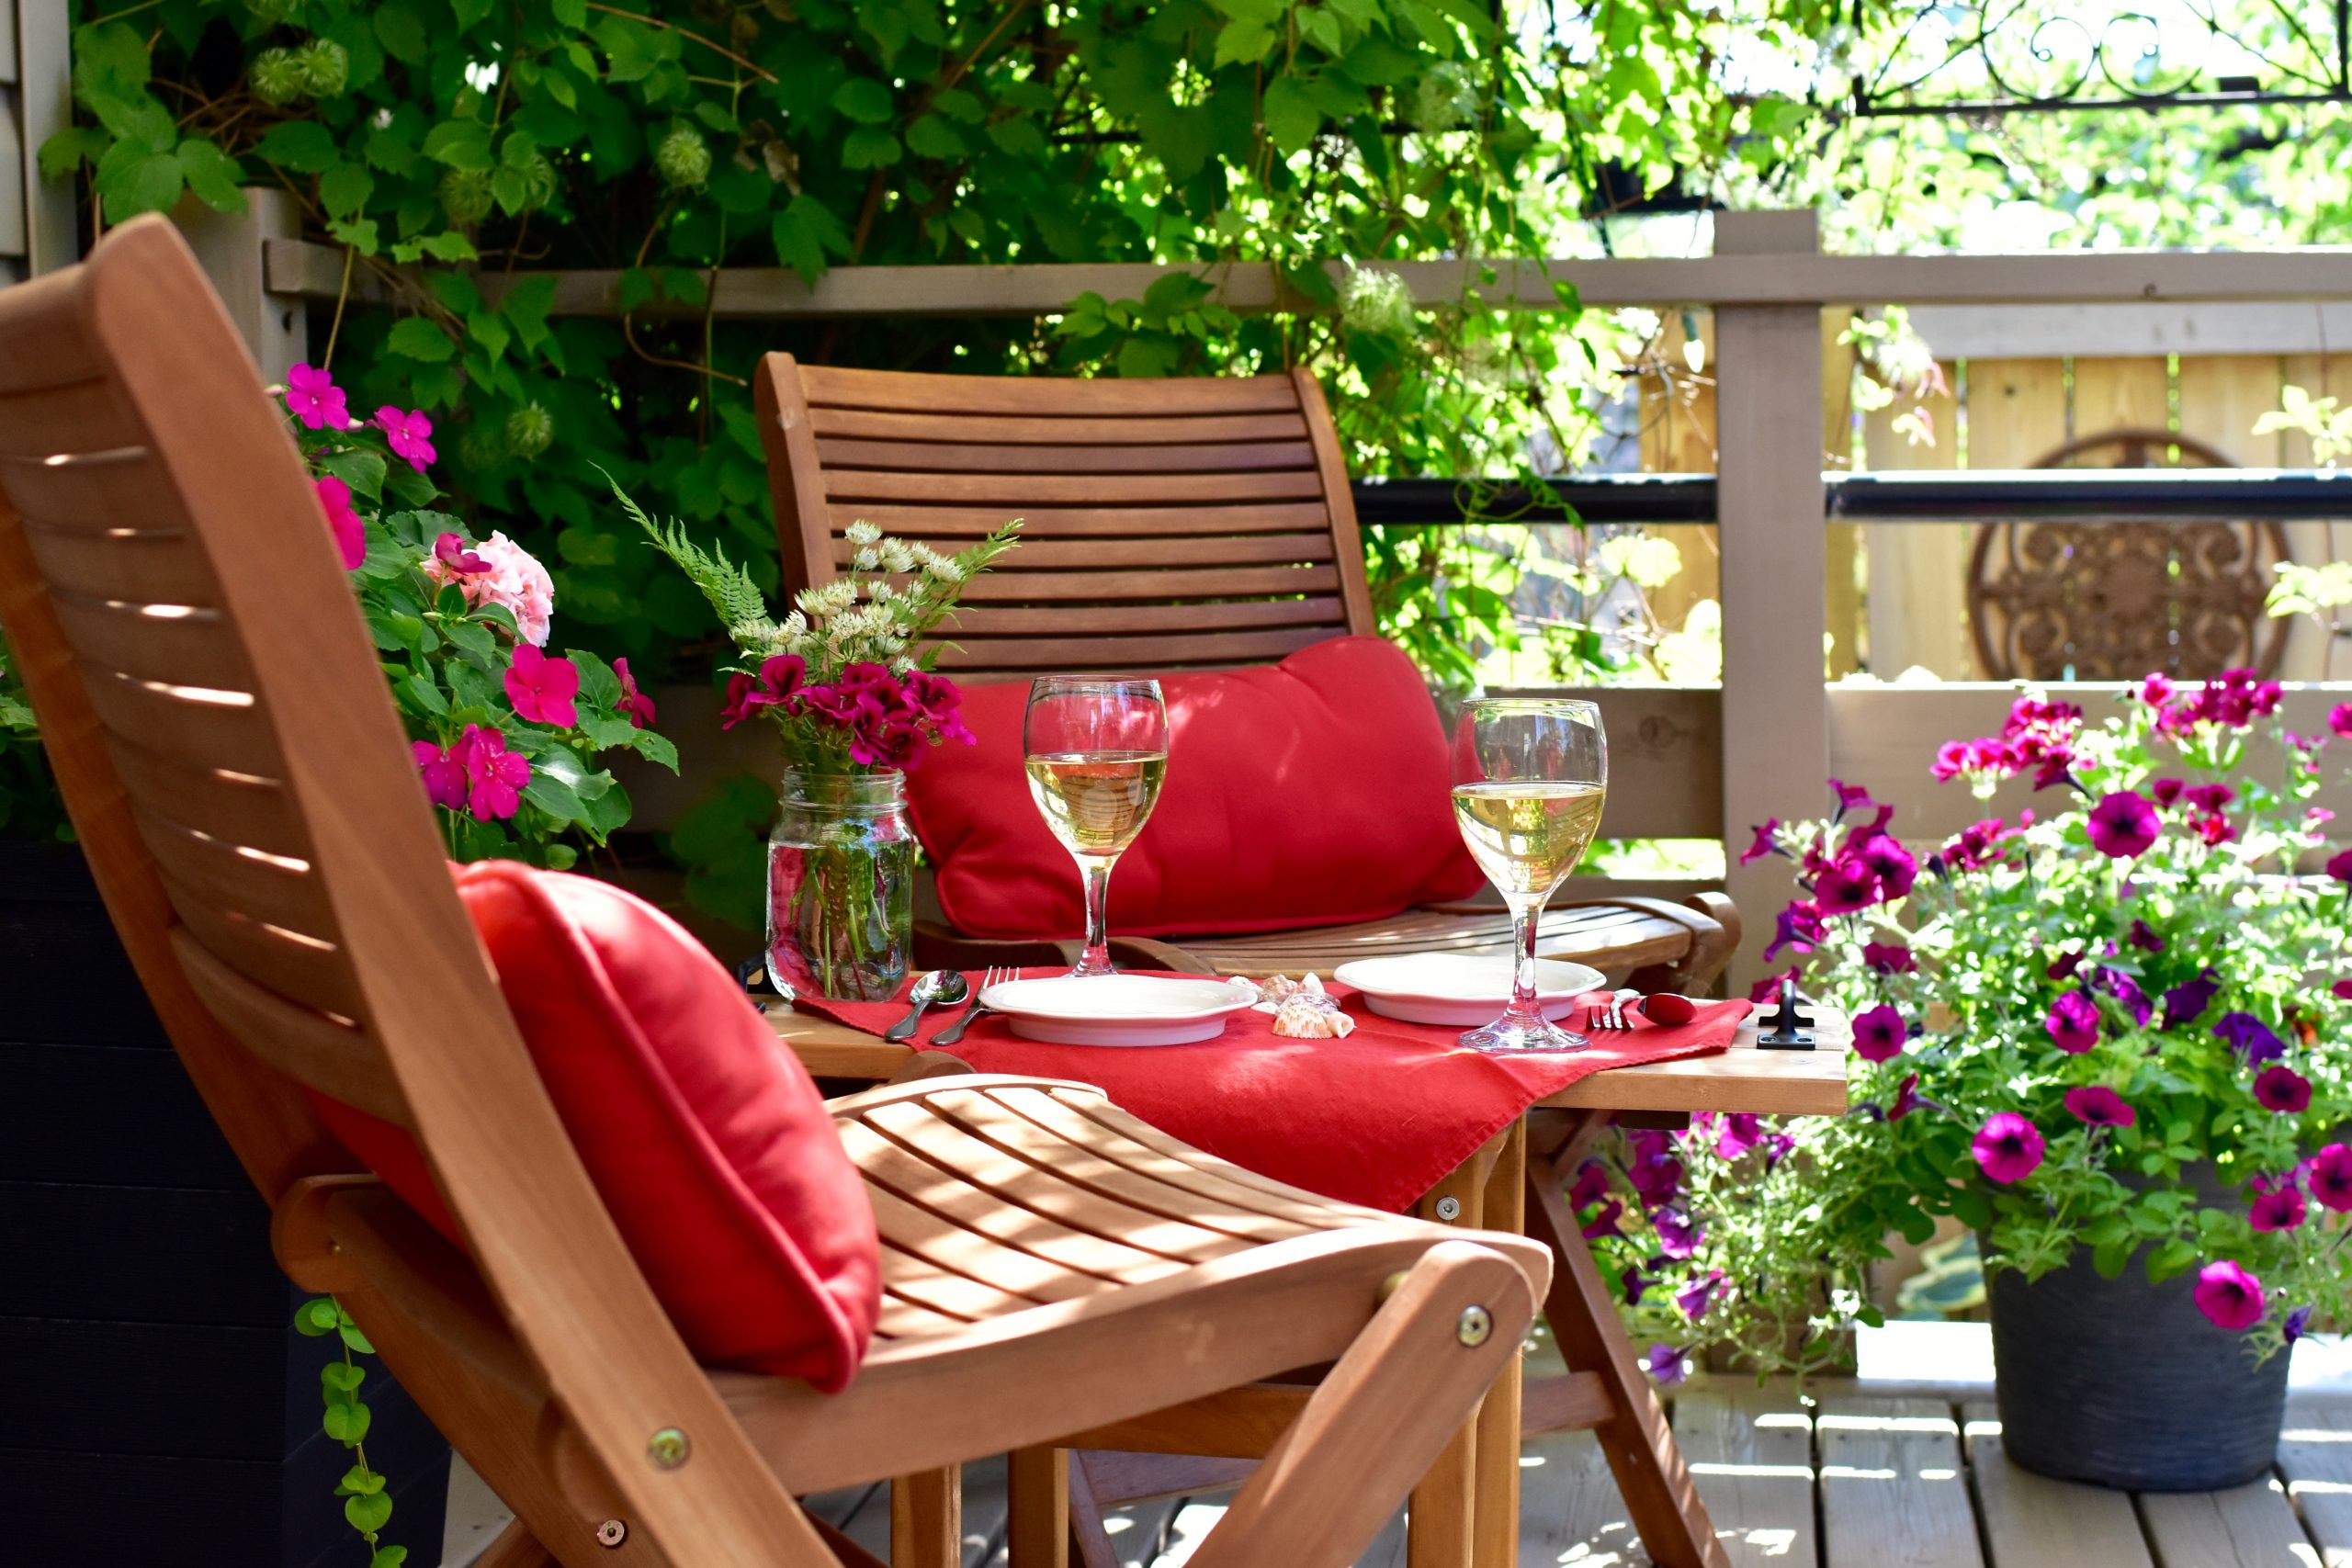 Wood patio chairs with red cushions, pretty flowers nearby, wine on the table